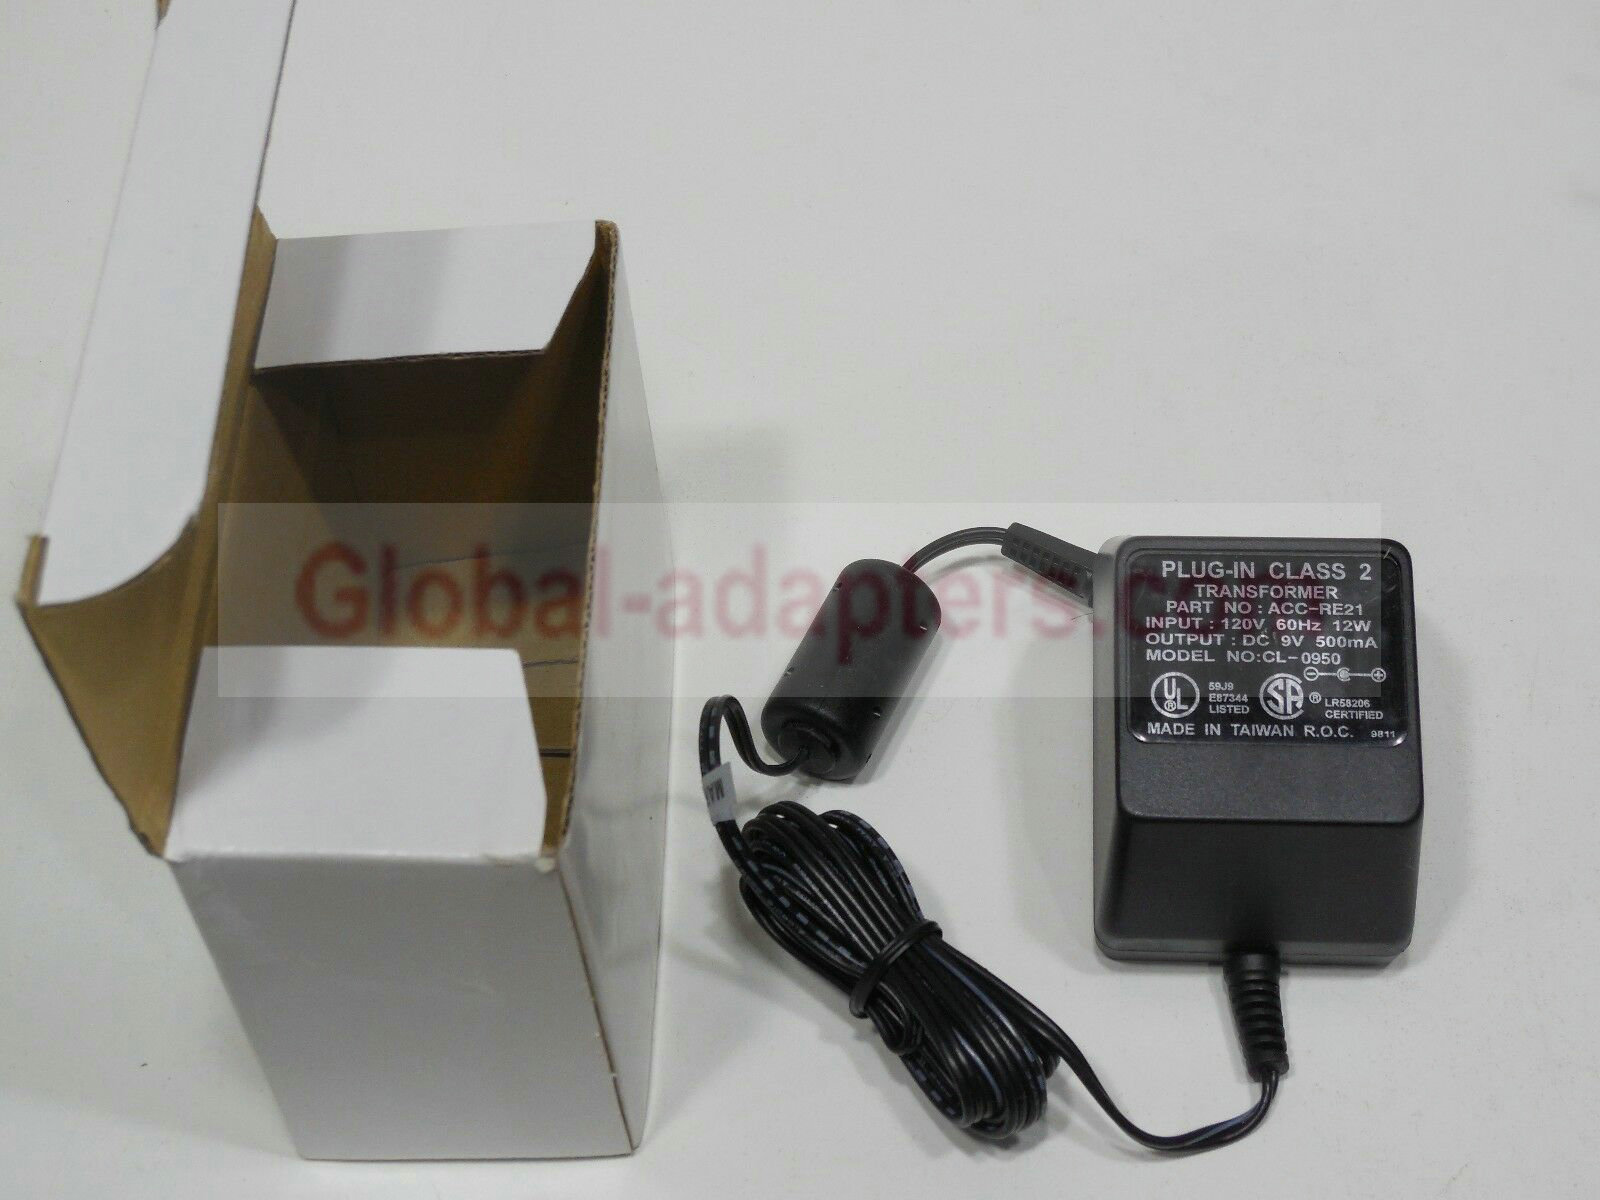 New 9V 500mA CL-0950 ACC-RE21 Class 2 Transformer Power Supply Ac Adapter